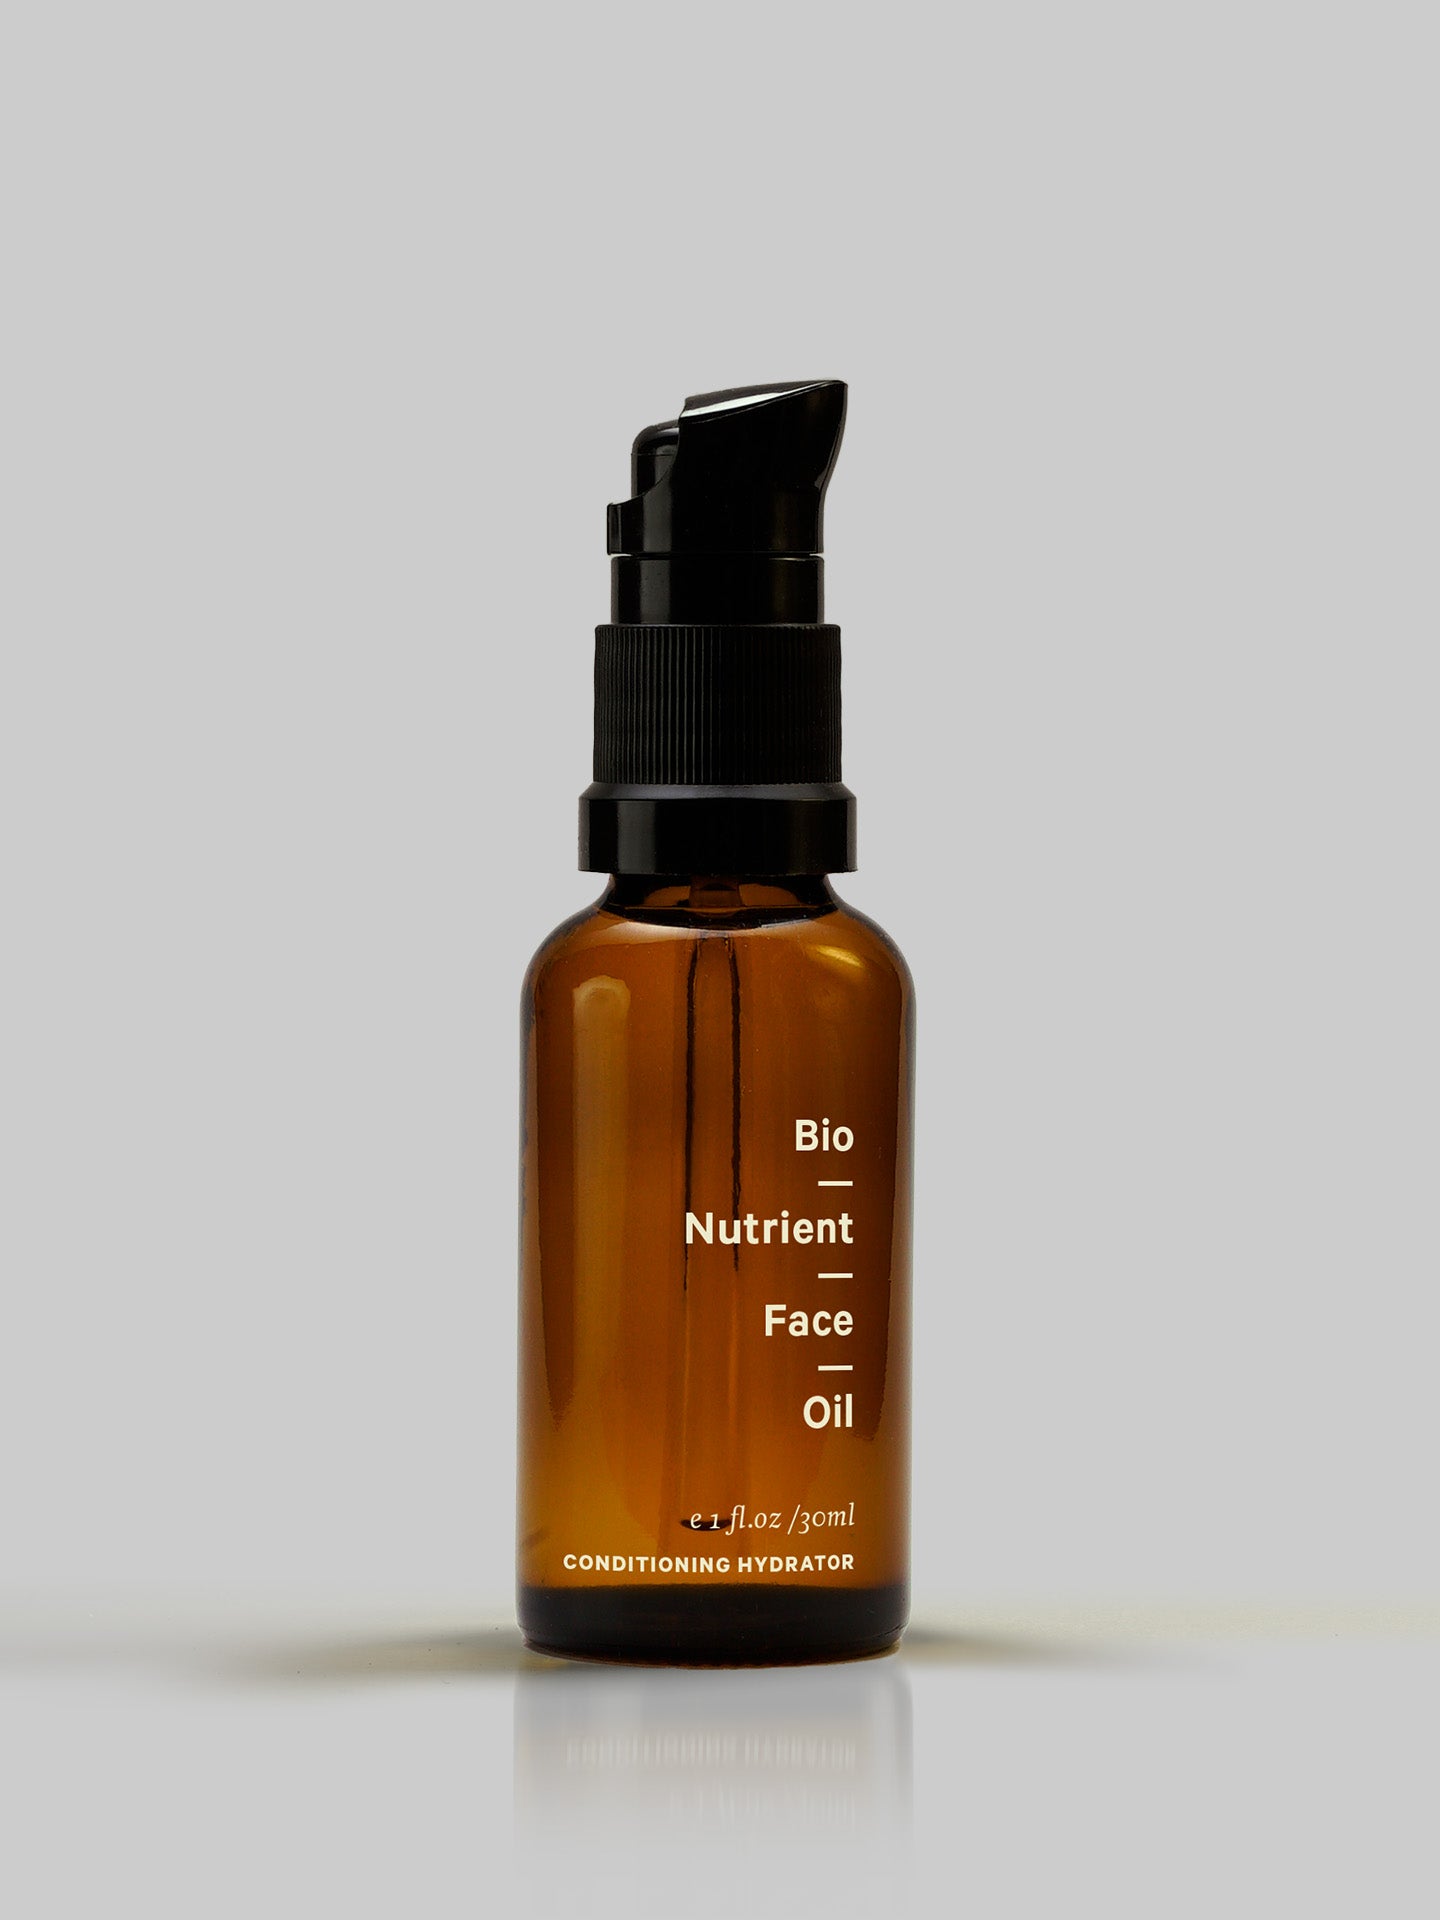 A bottle of MARYSE Bio Nutrient – Face Oil on a grey background.